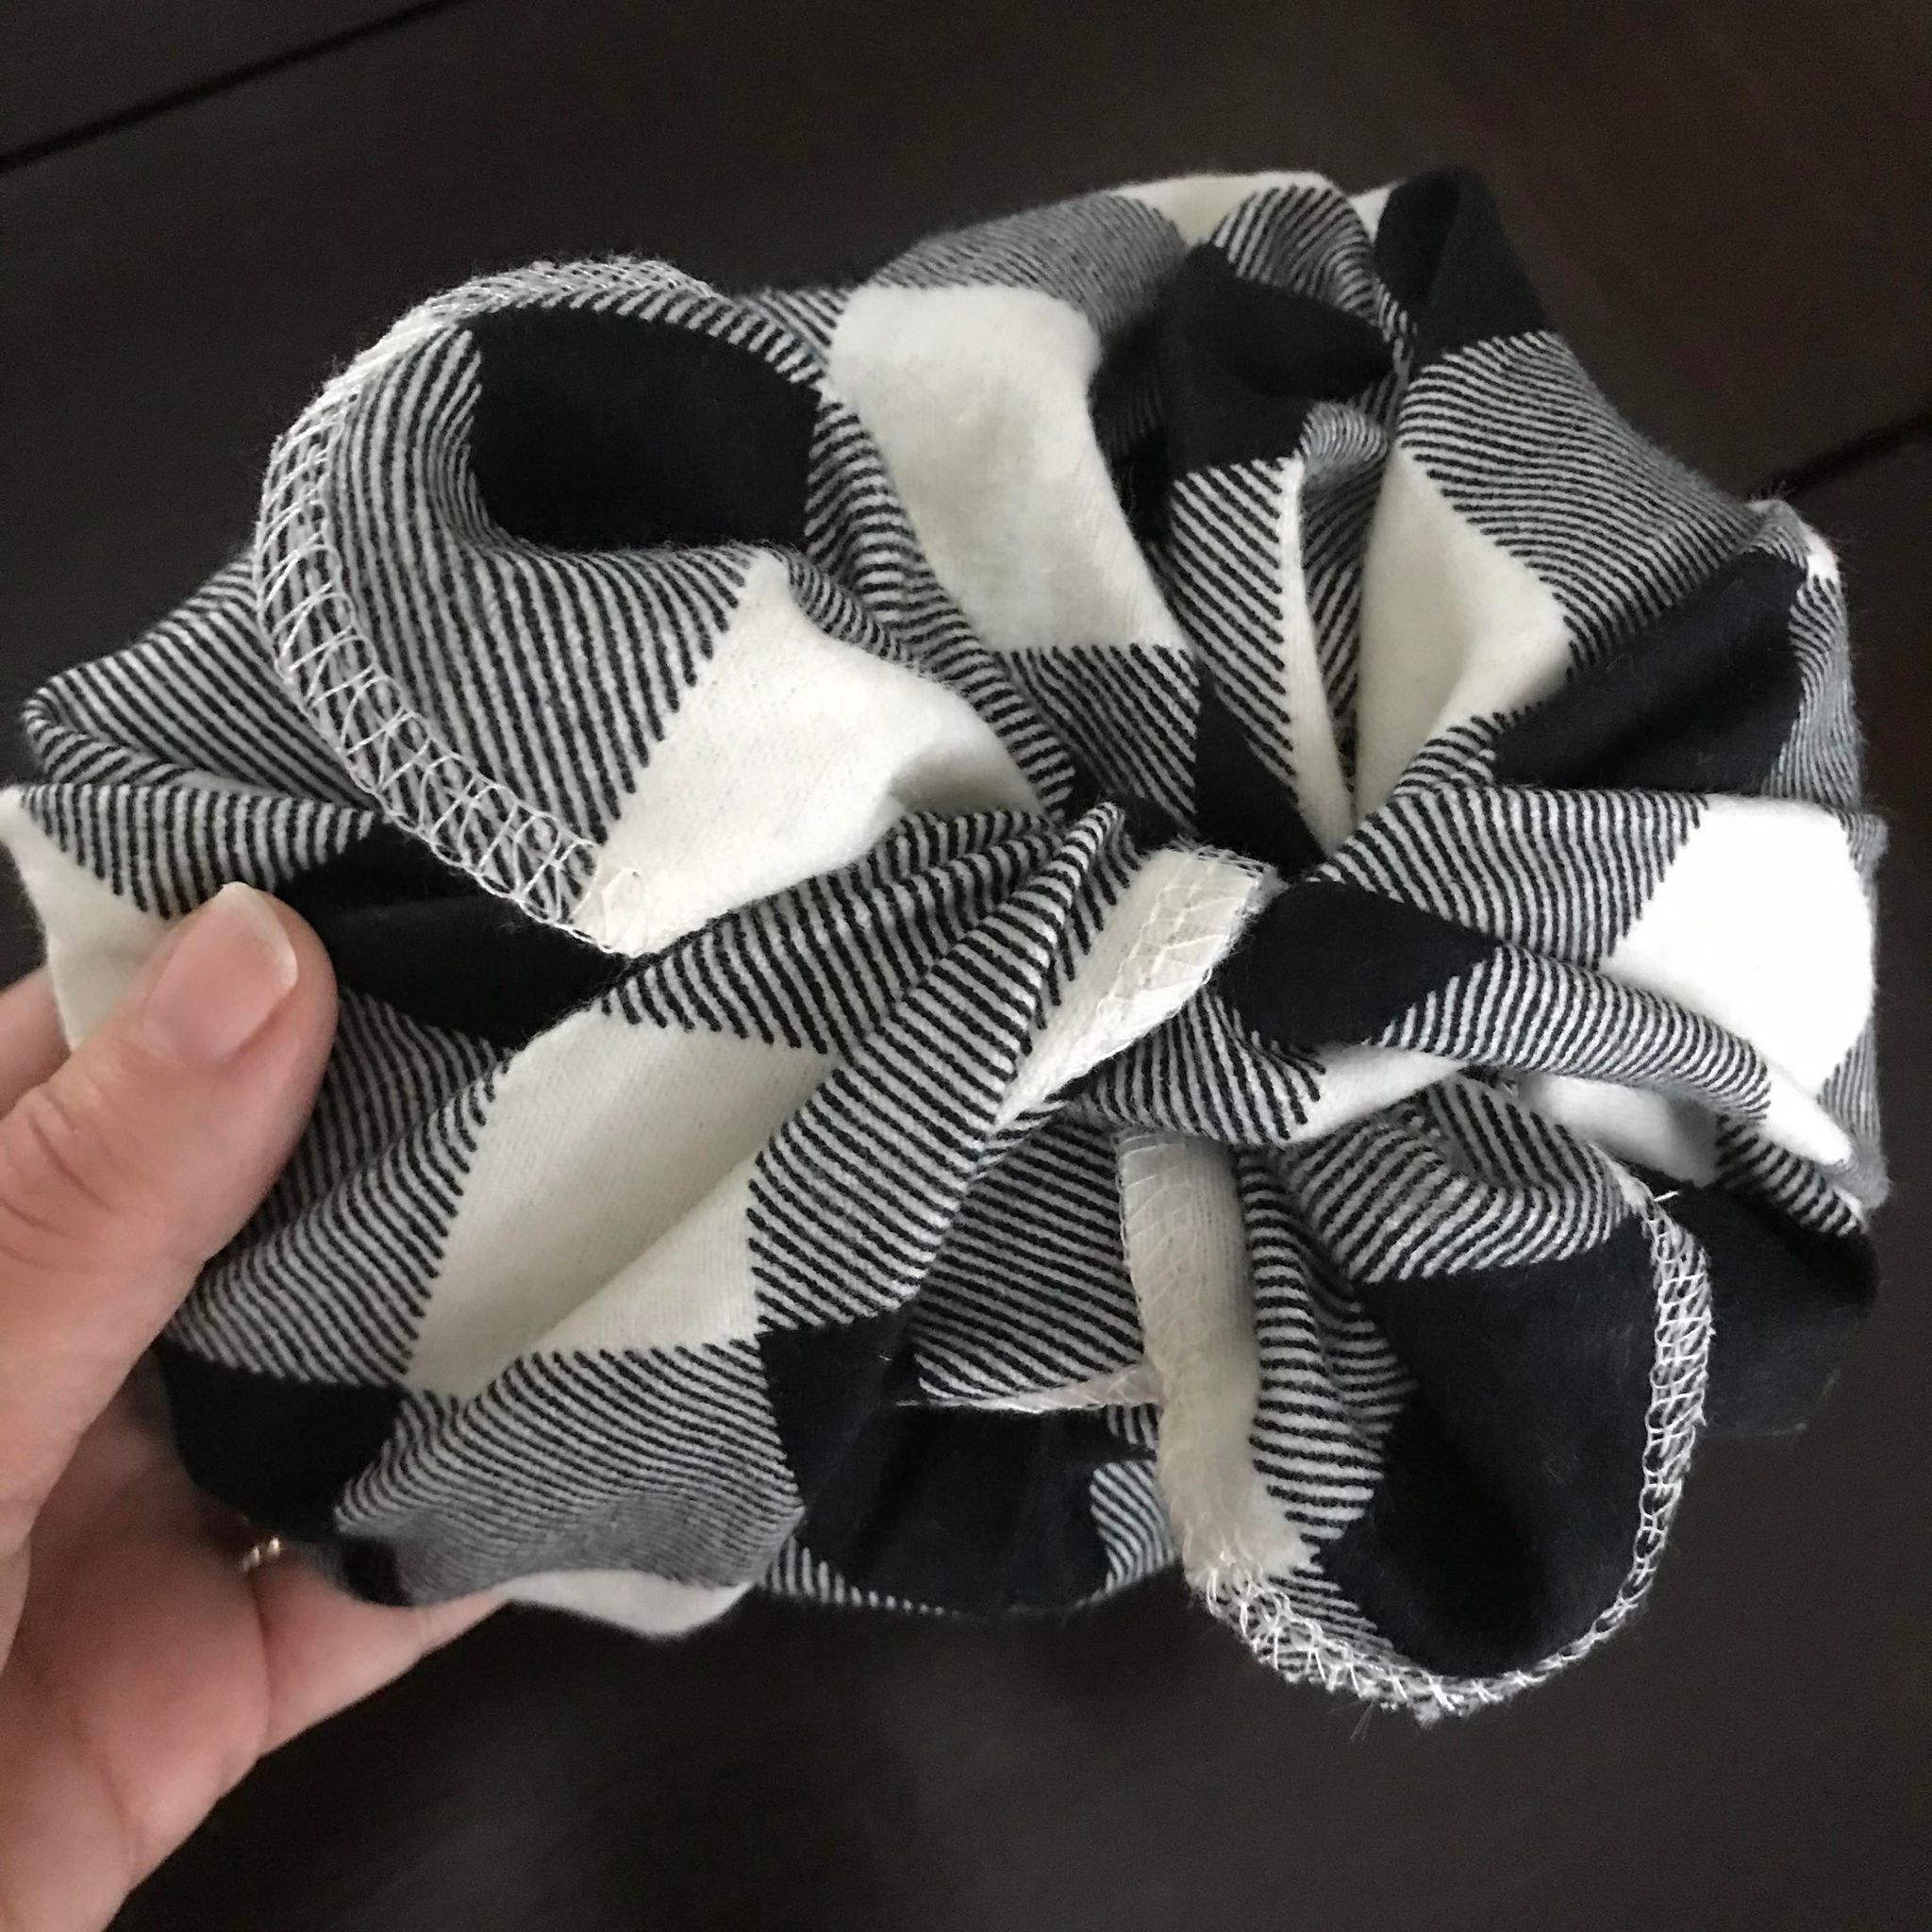 A small gift wrapped in black and white plaid cotton flannel gift wrap from the Canadian brand Cheeks Ahoy